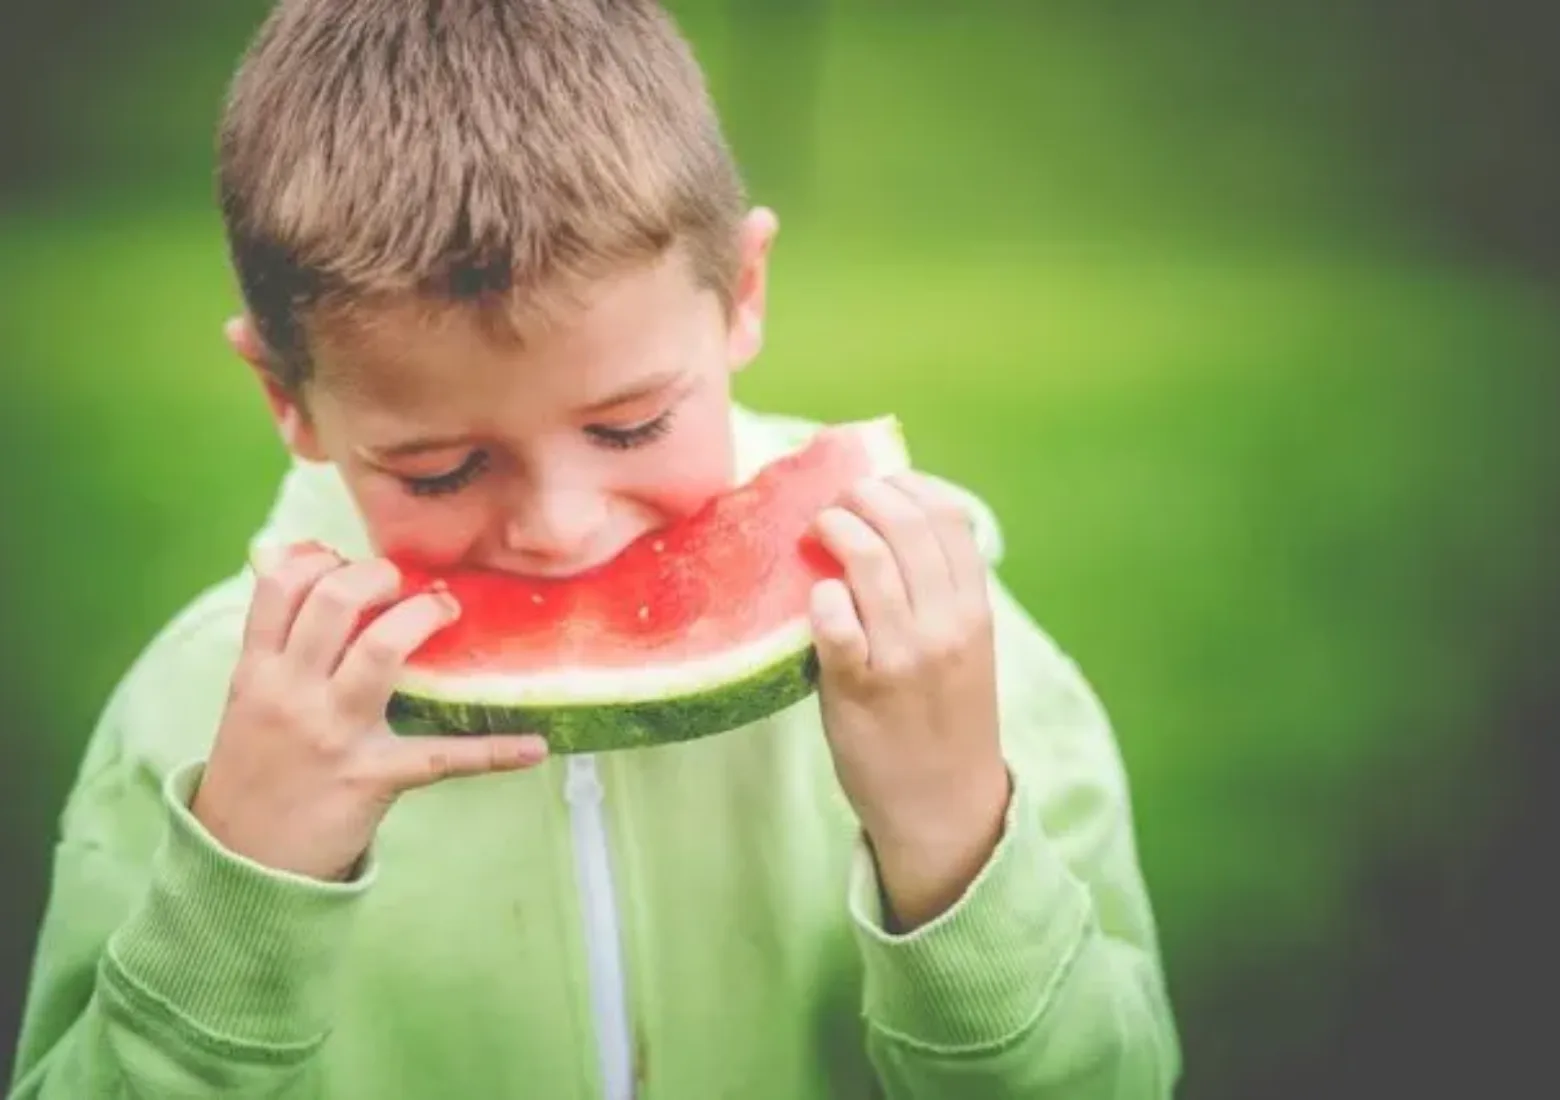 How to Help Your Kids “Eat Right”